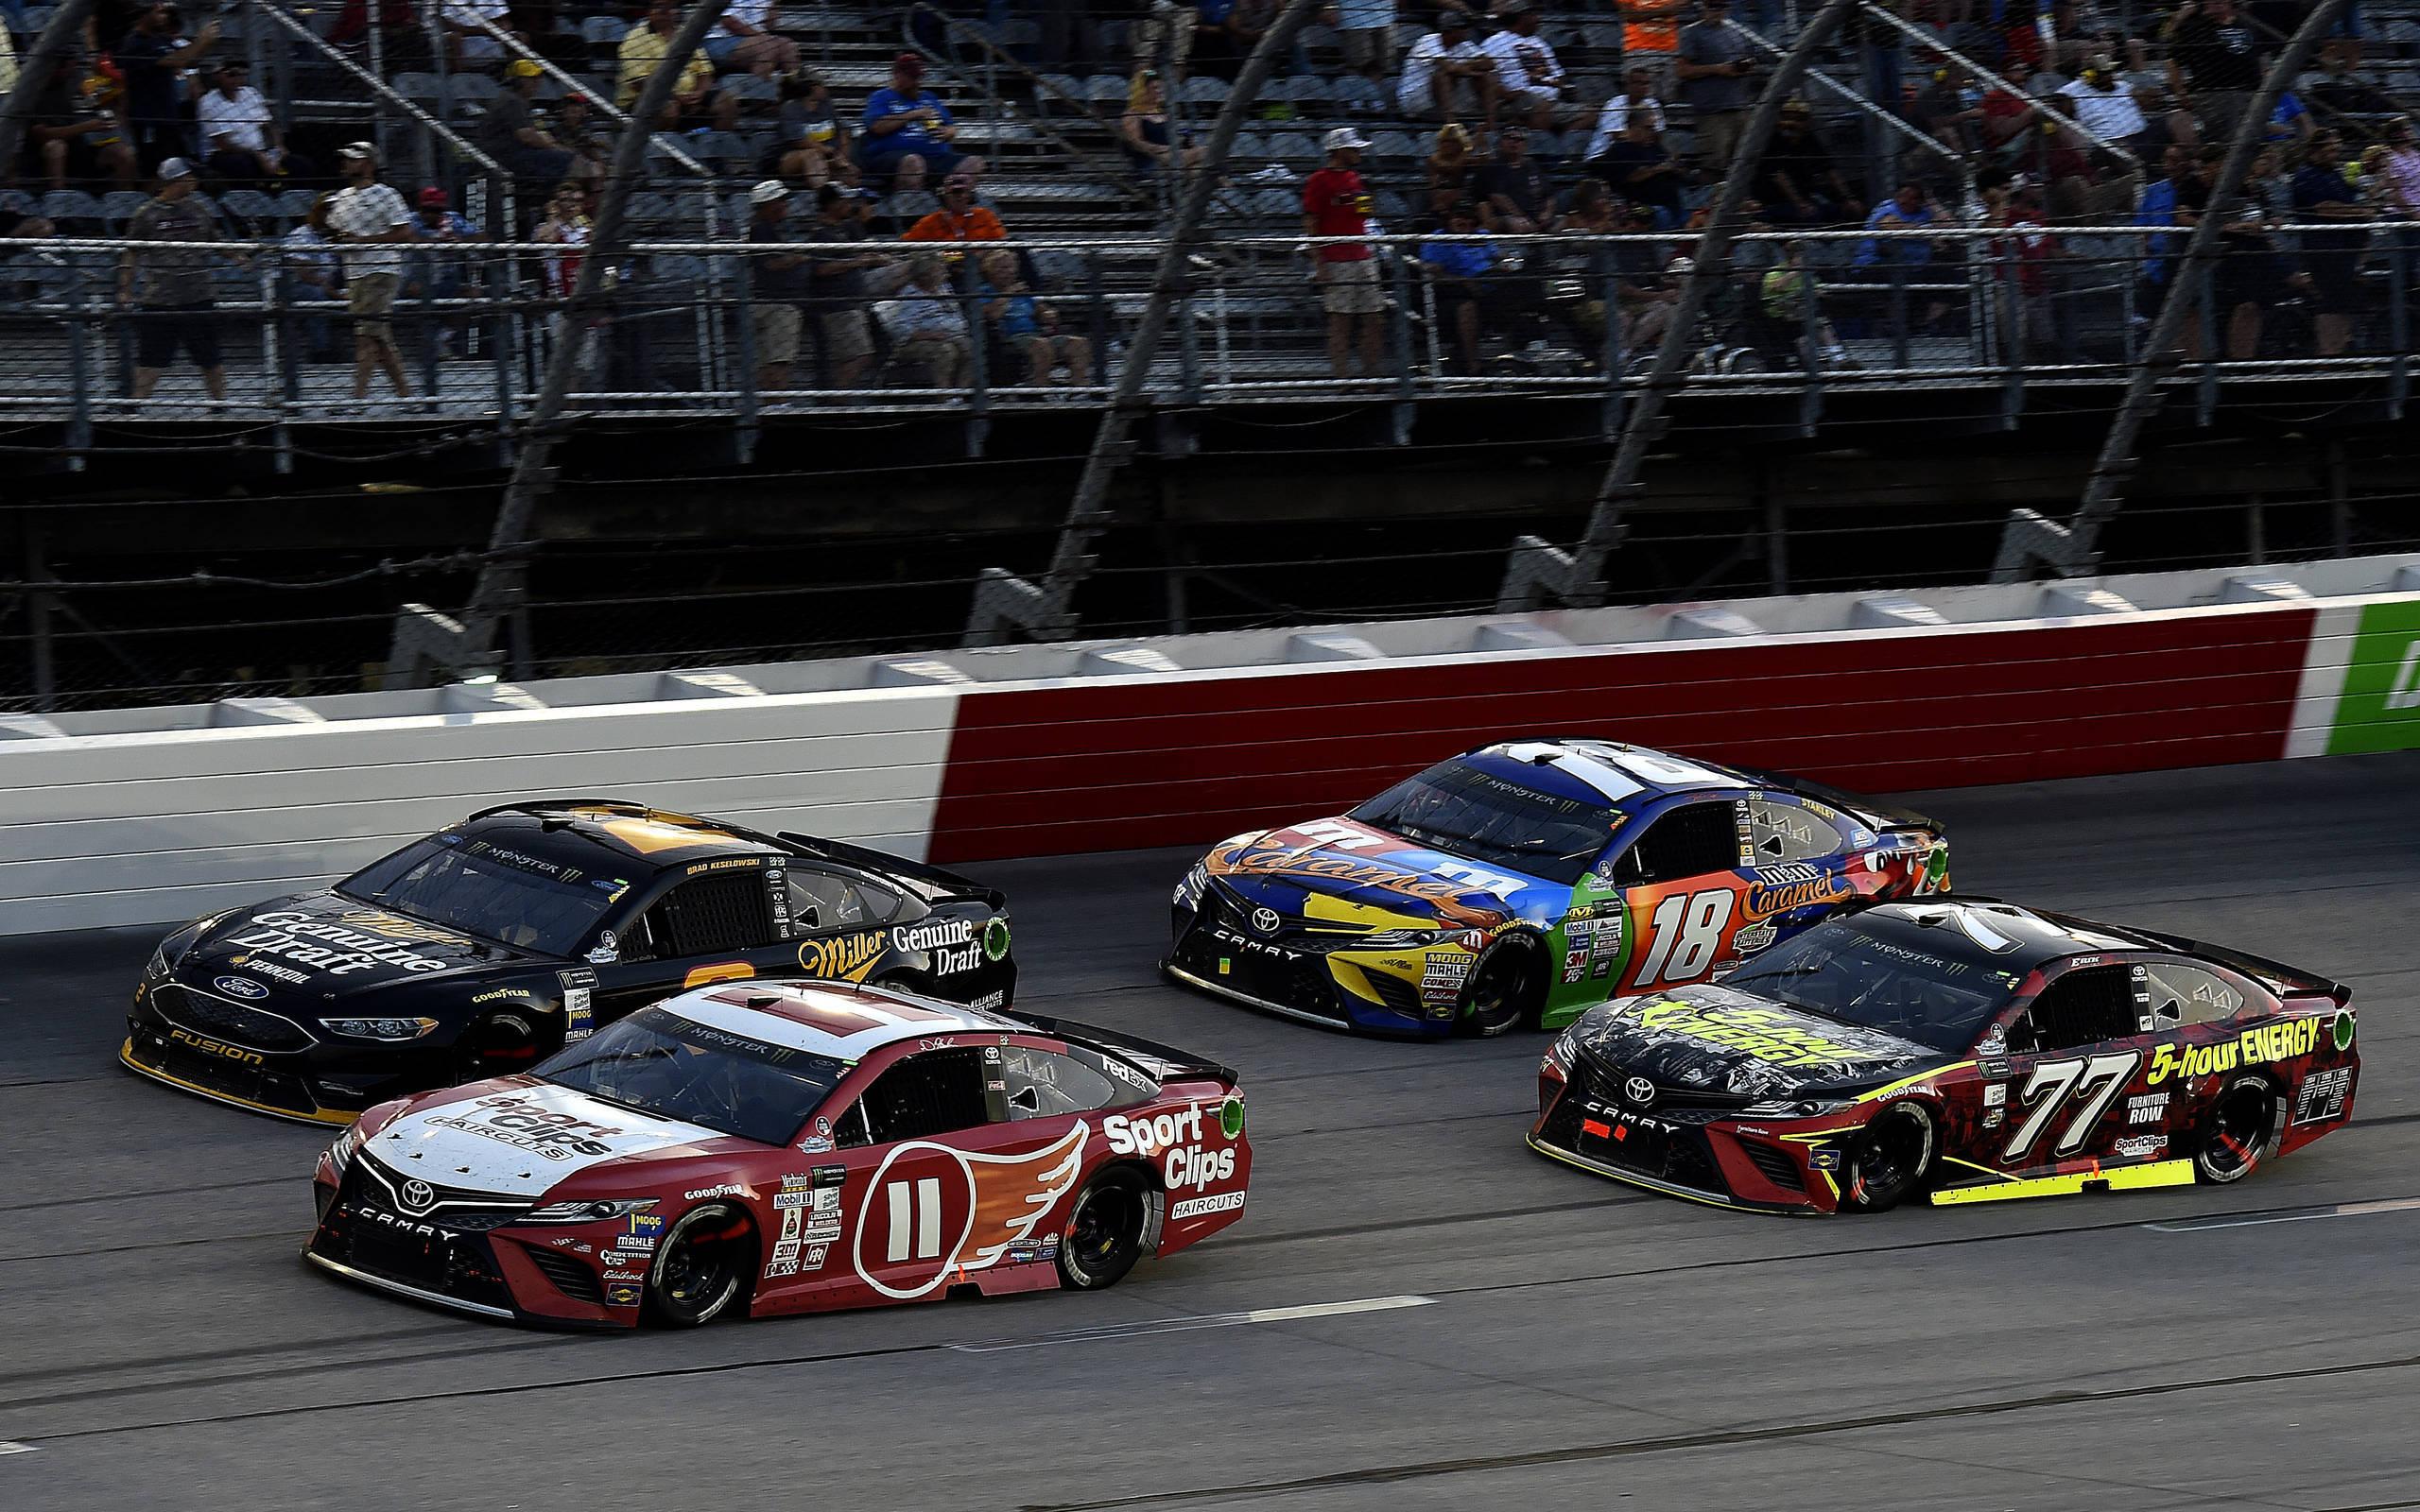 First look at 2018 NASCAR Cup rules: All backup cars will have to